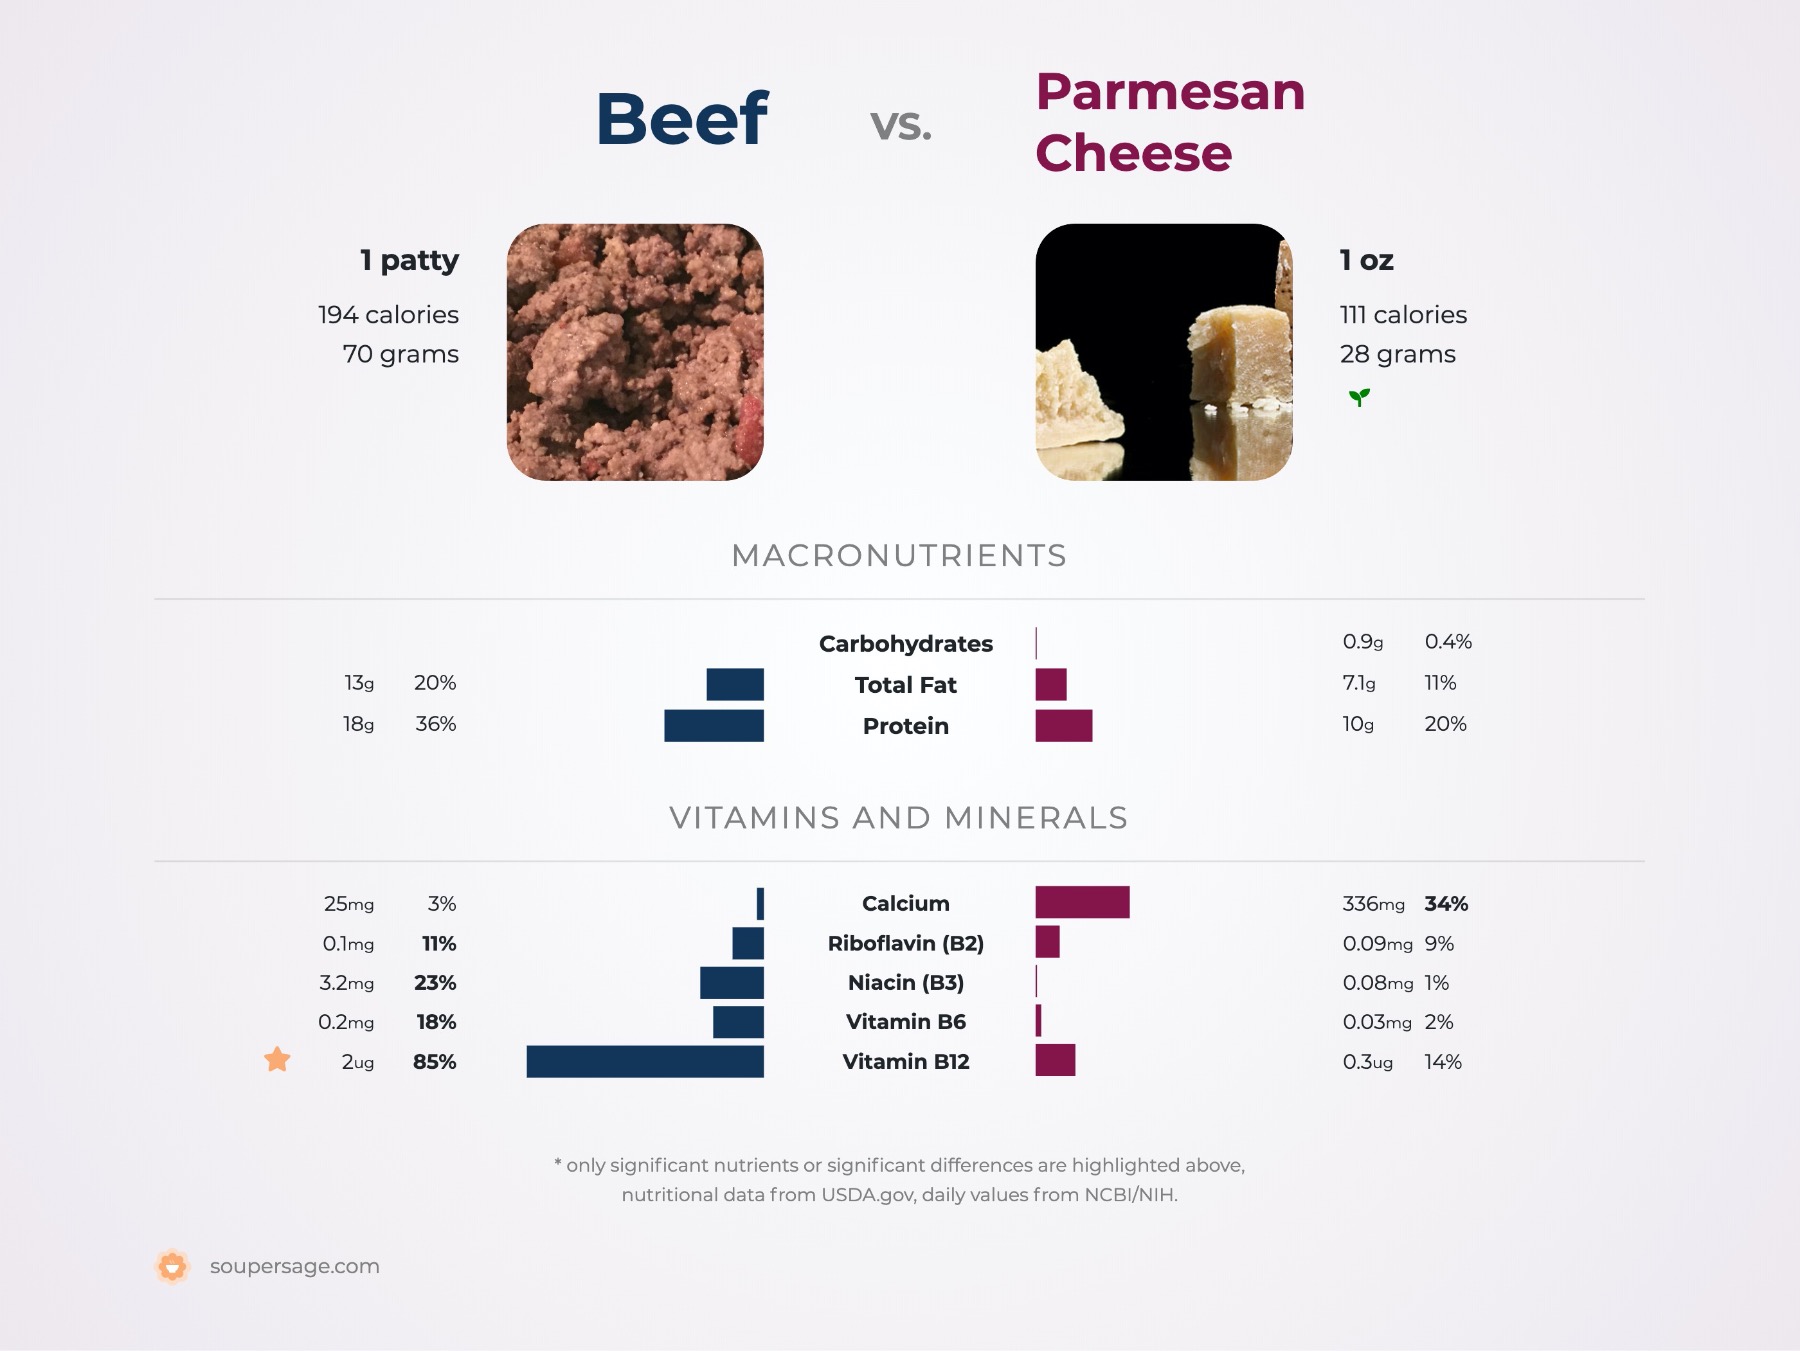 nutrition comparison of beef vs. parmesan cheese